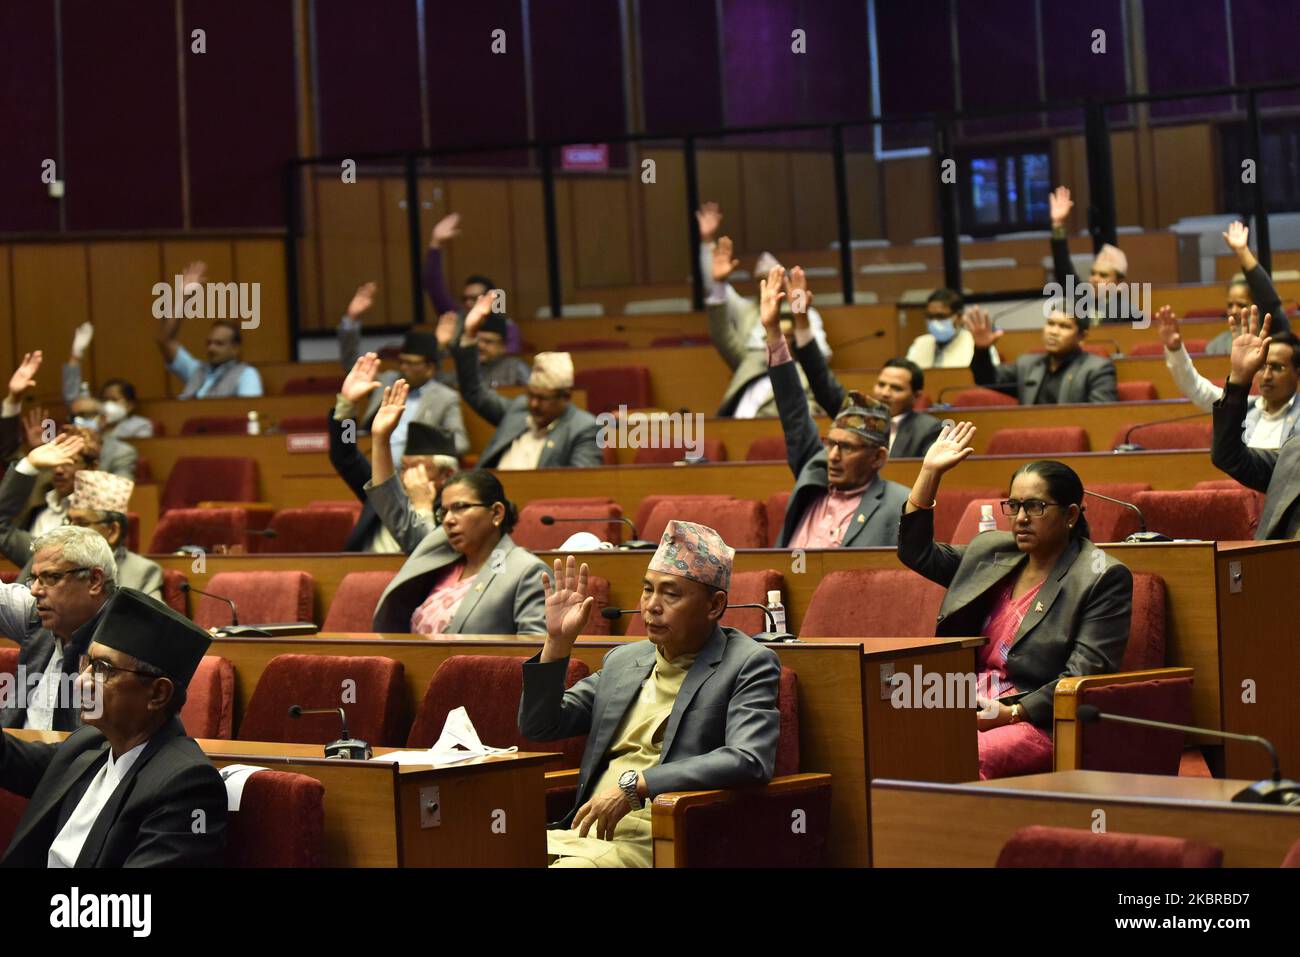 Nepal's National Assembly members gesture as they vote on Constitution amendment bill at Kathmandu, Nepal on Thursday, June 18, 2020. The National Assembly unanimously adopts Constitution amendment bill. (Photo by Narayan Maharjan/NurPhoto) Stock Photo